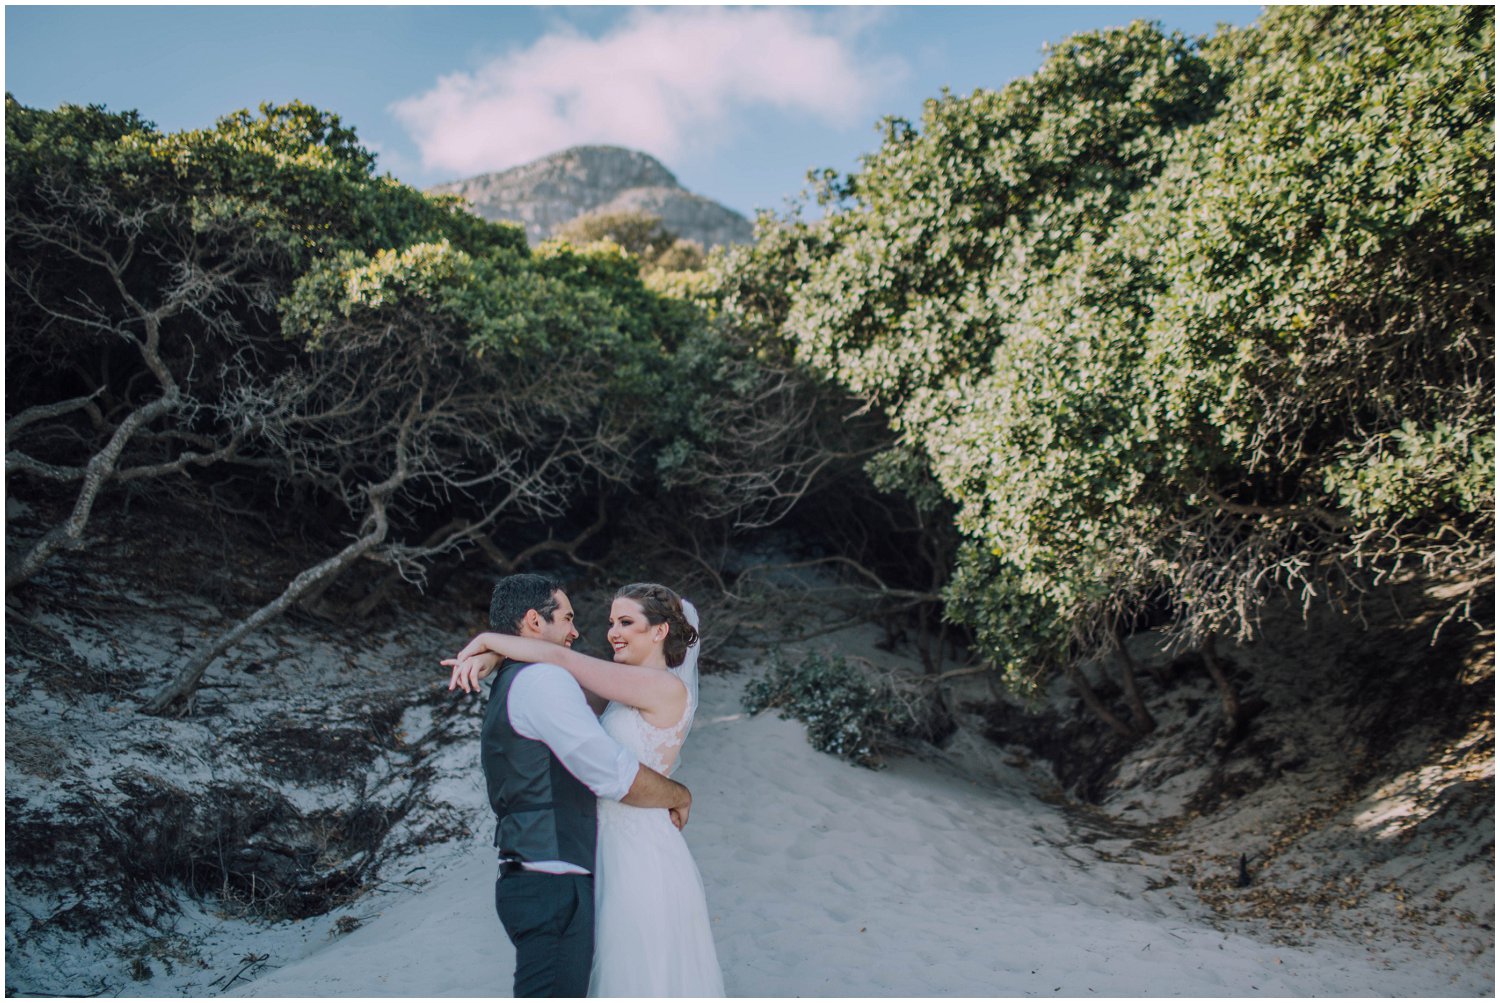 Top Wedding Photographer Cape Town South Africa Artistic Creative Documentary Wedding Photography Rue Kruger_0514.jpg